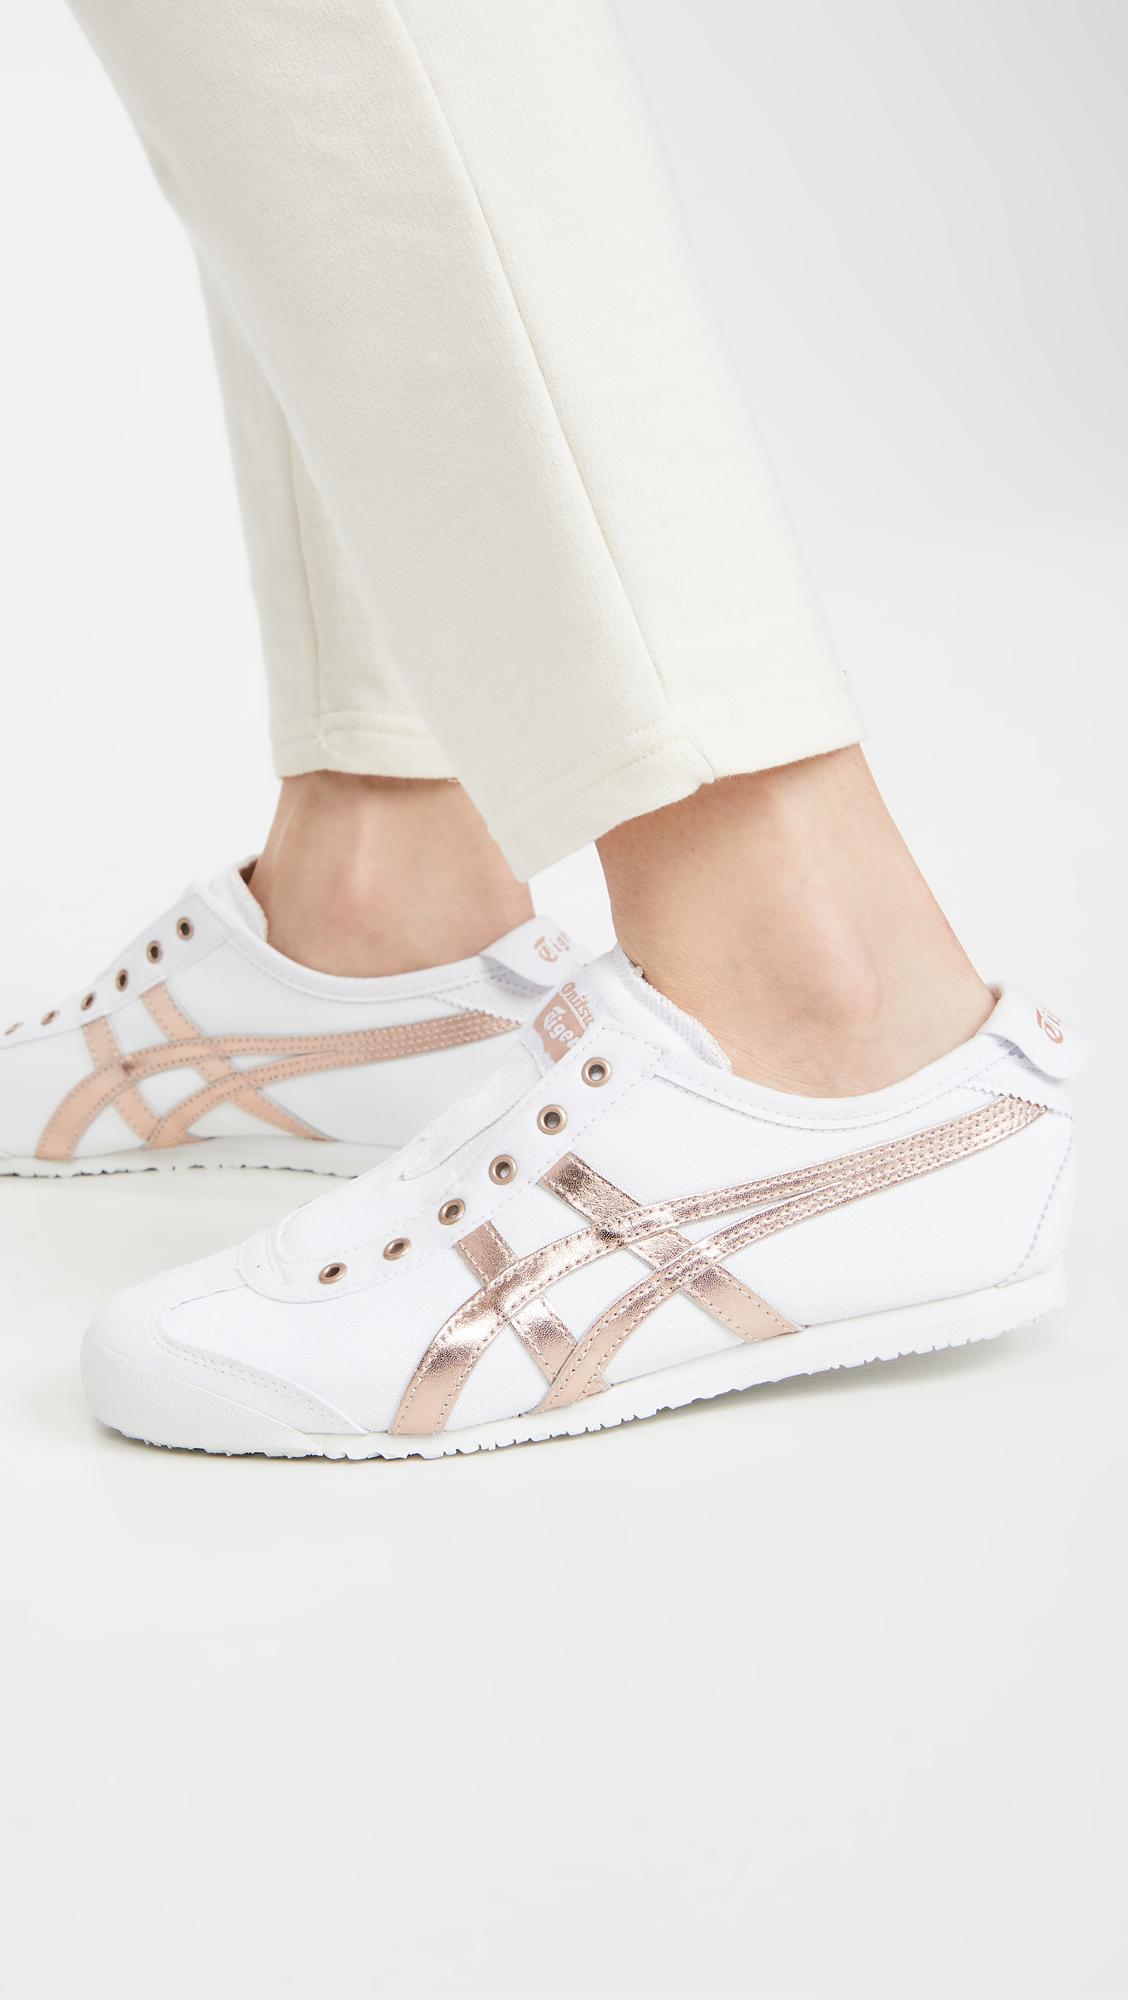 Onitsuka Tiger Mexico 66 Slip On Sneakers in White | Lyst